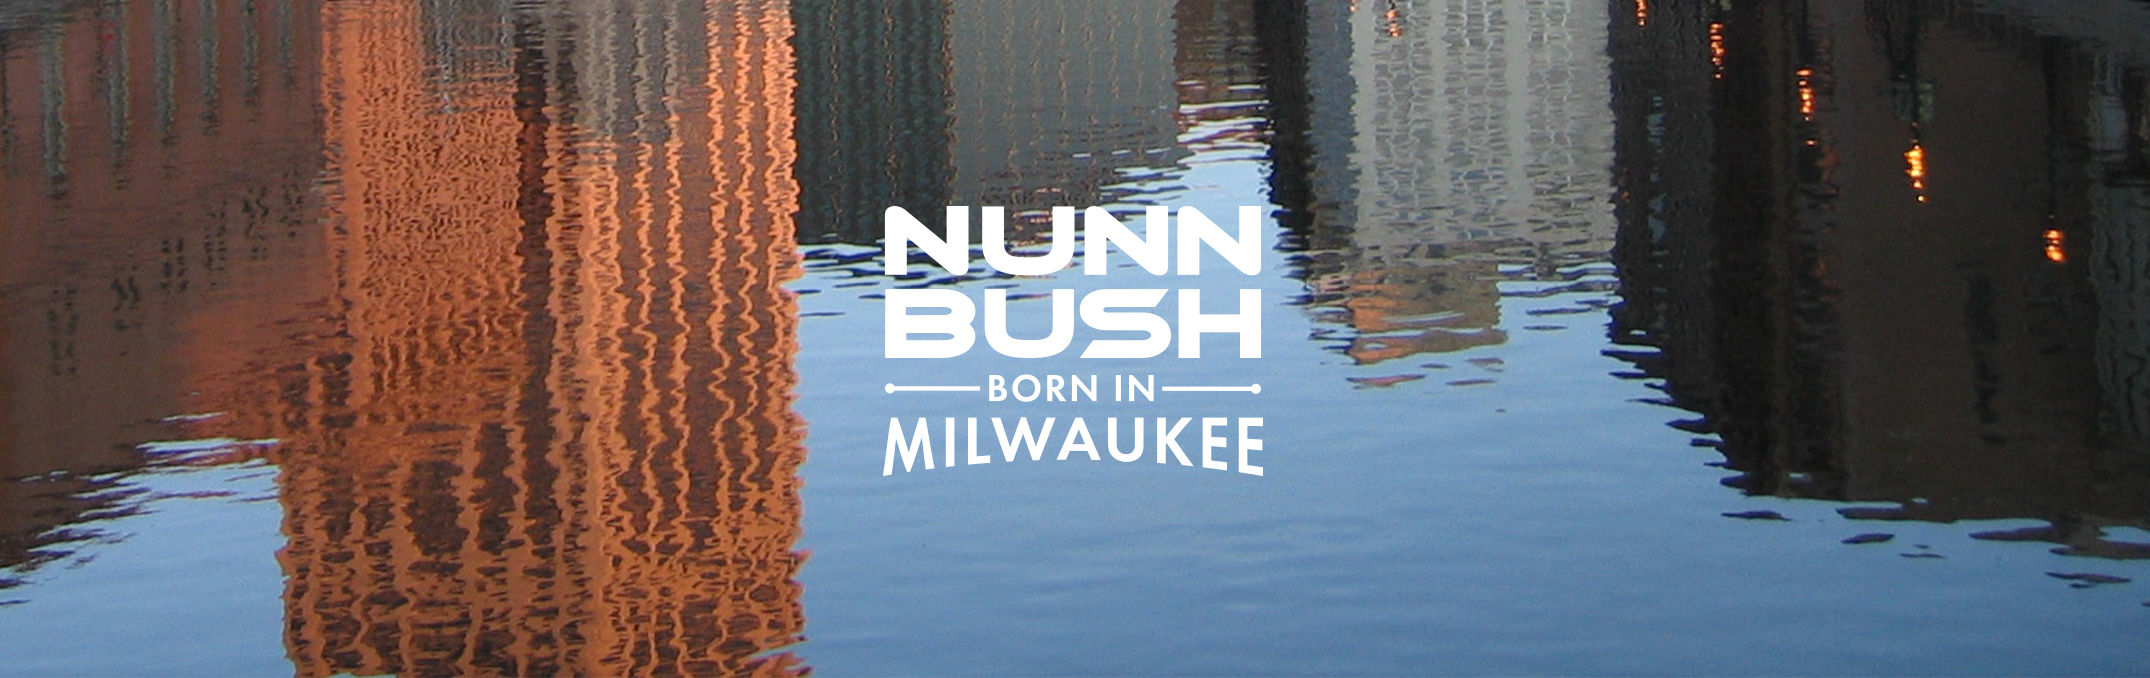 Nunn Bush, Born in Milwaukee. The featured image is the Milwaukee River with buildings reflected in the water.